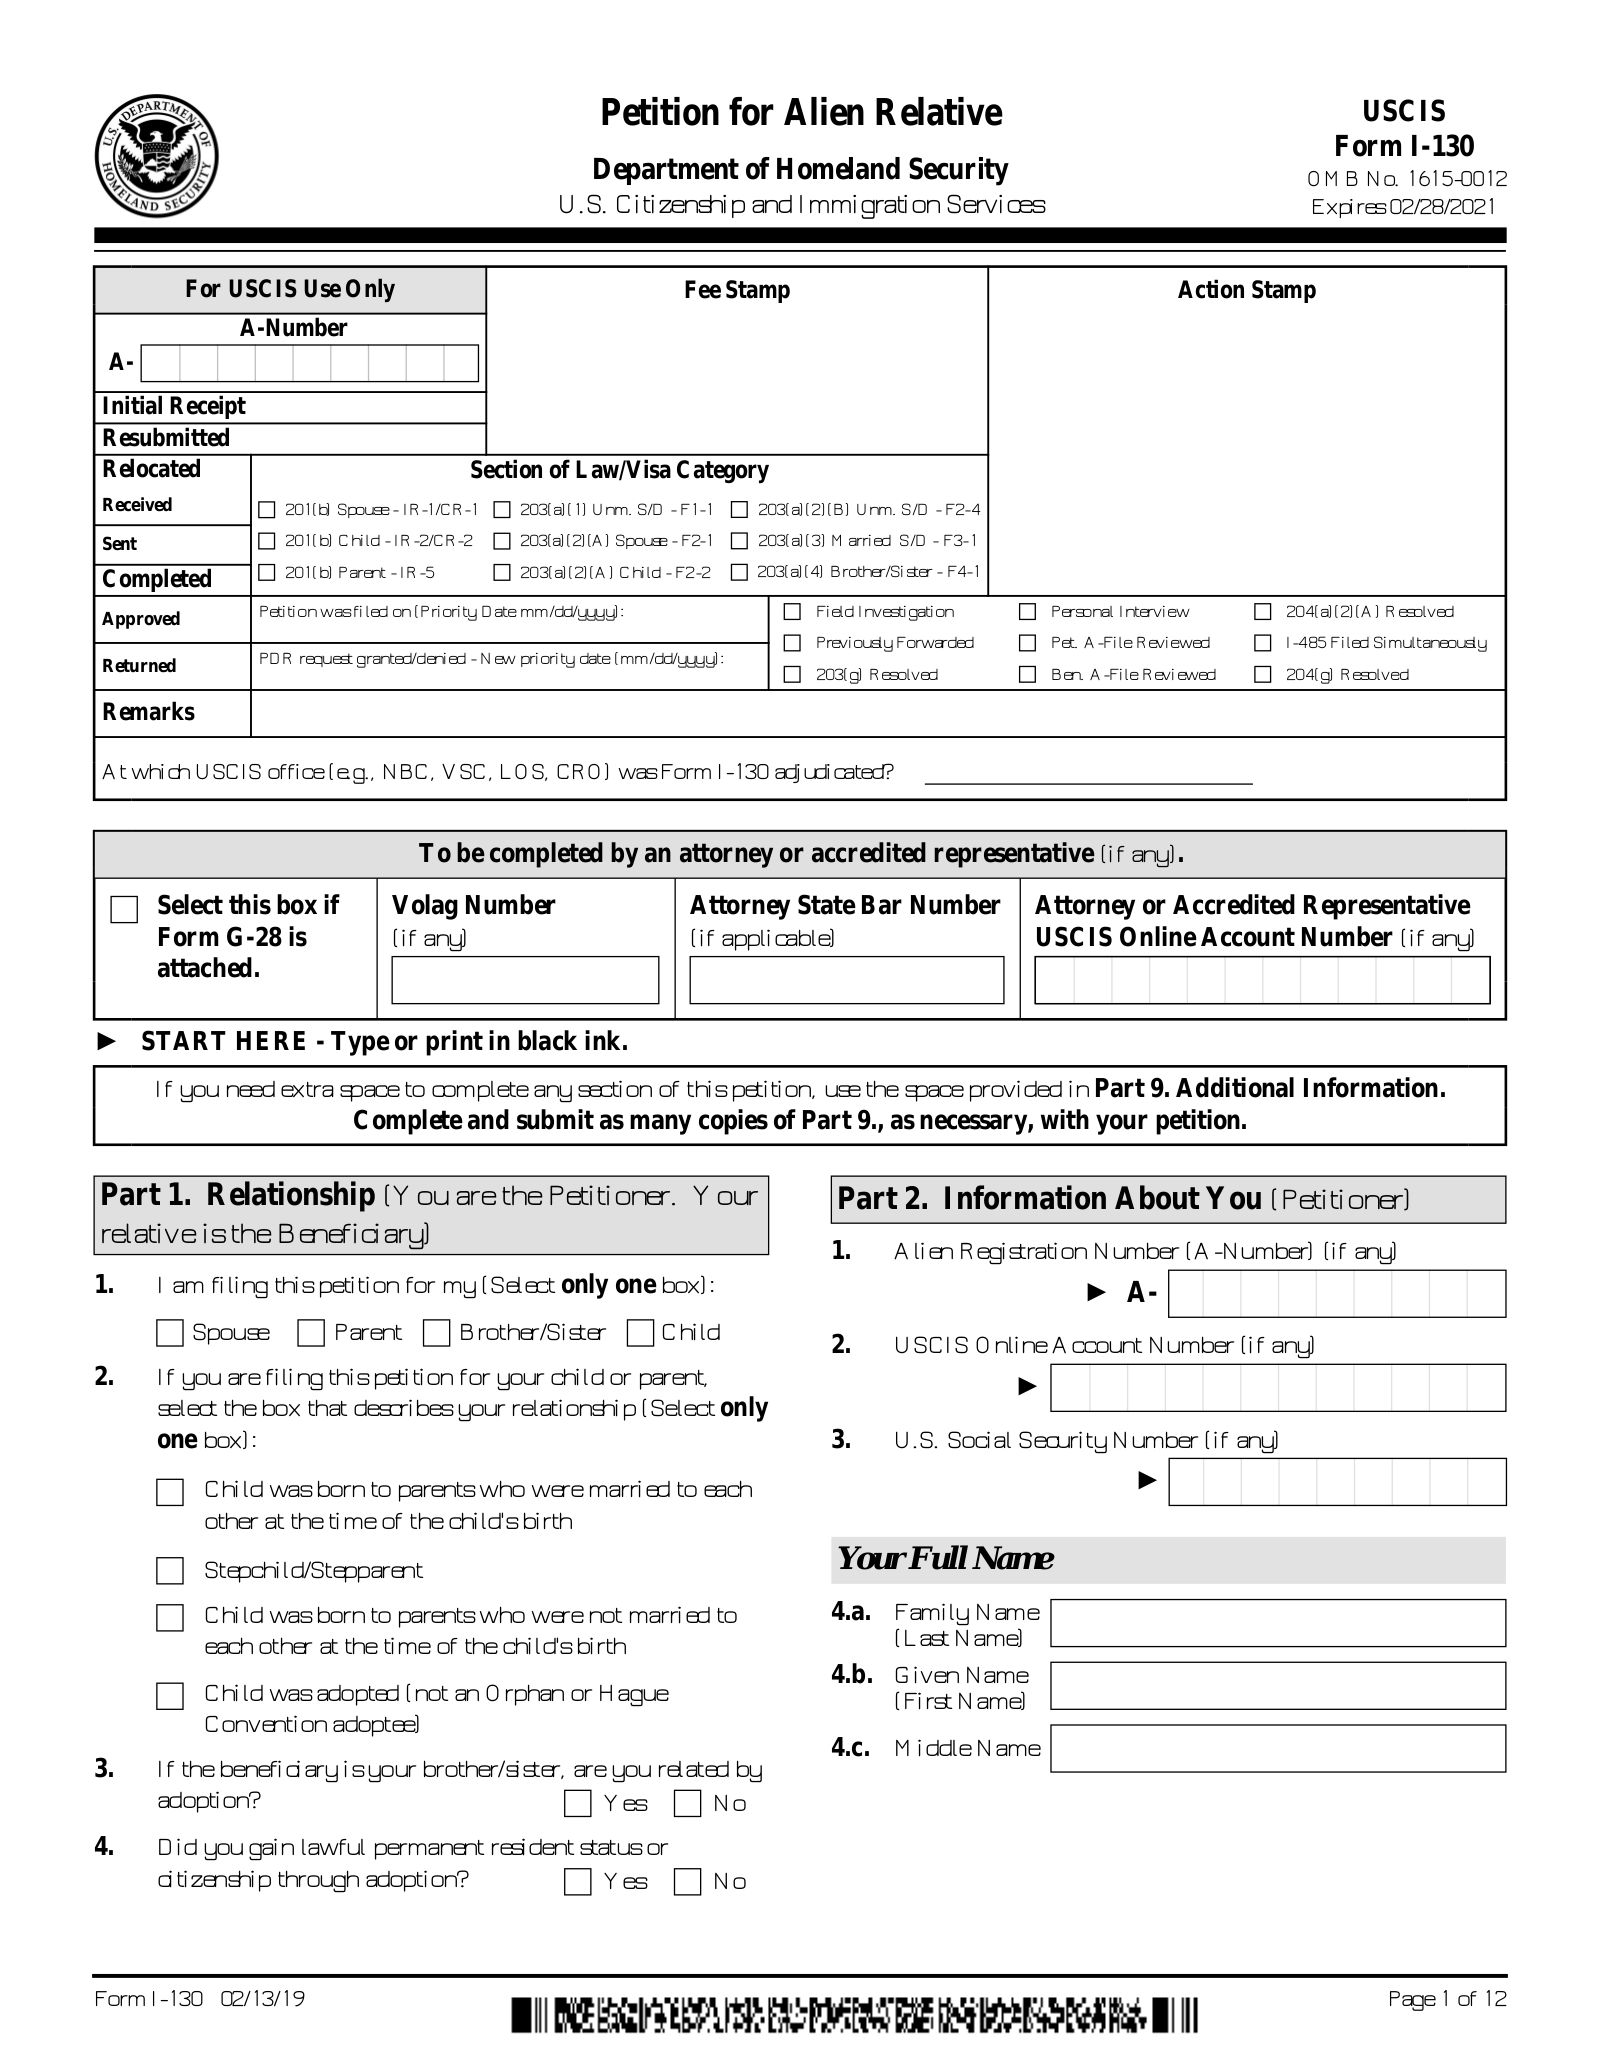 uscis forms ds 160